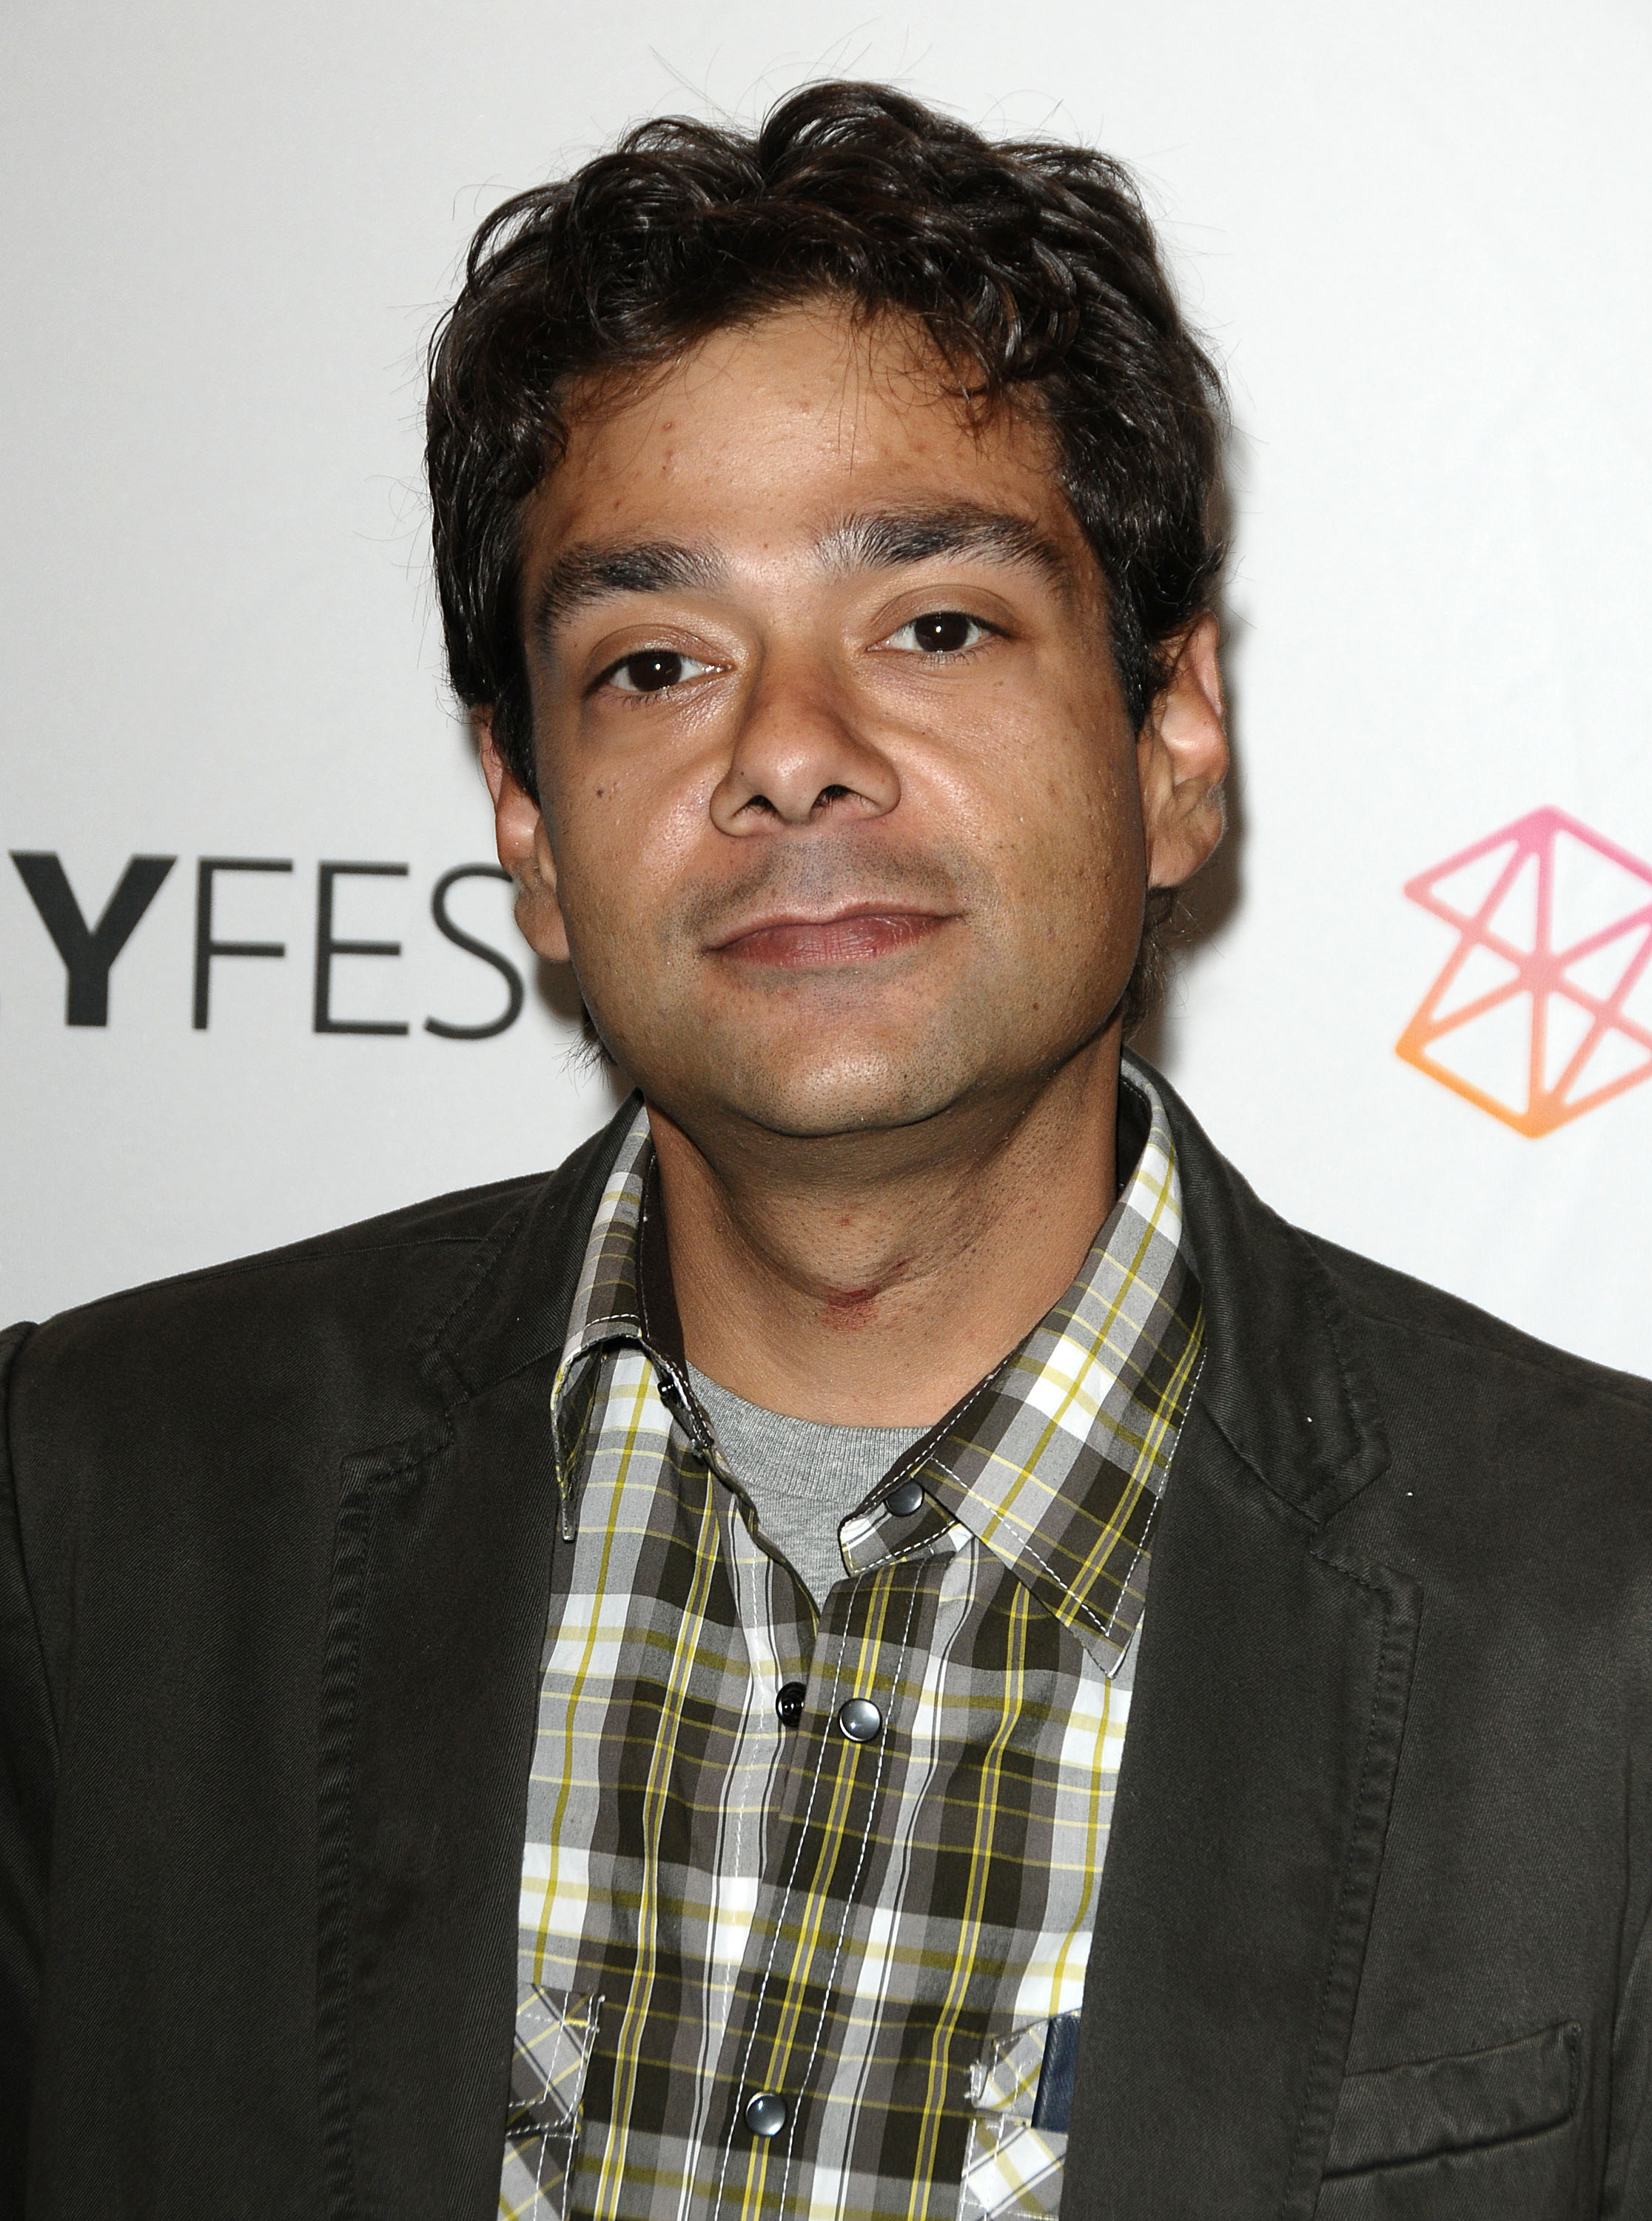 Shaun Weiss attends the "Freaks & Geeks/Undeclared" event at PaleyFest 2011 at Saban Theatre on March 12, 2011 | Photo: Getty Images